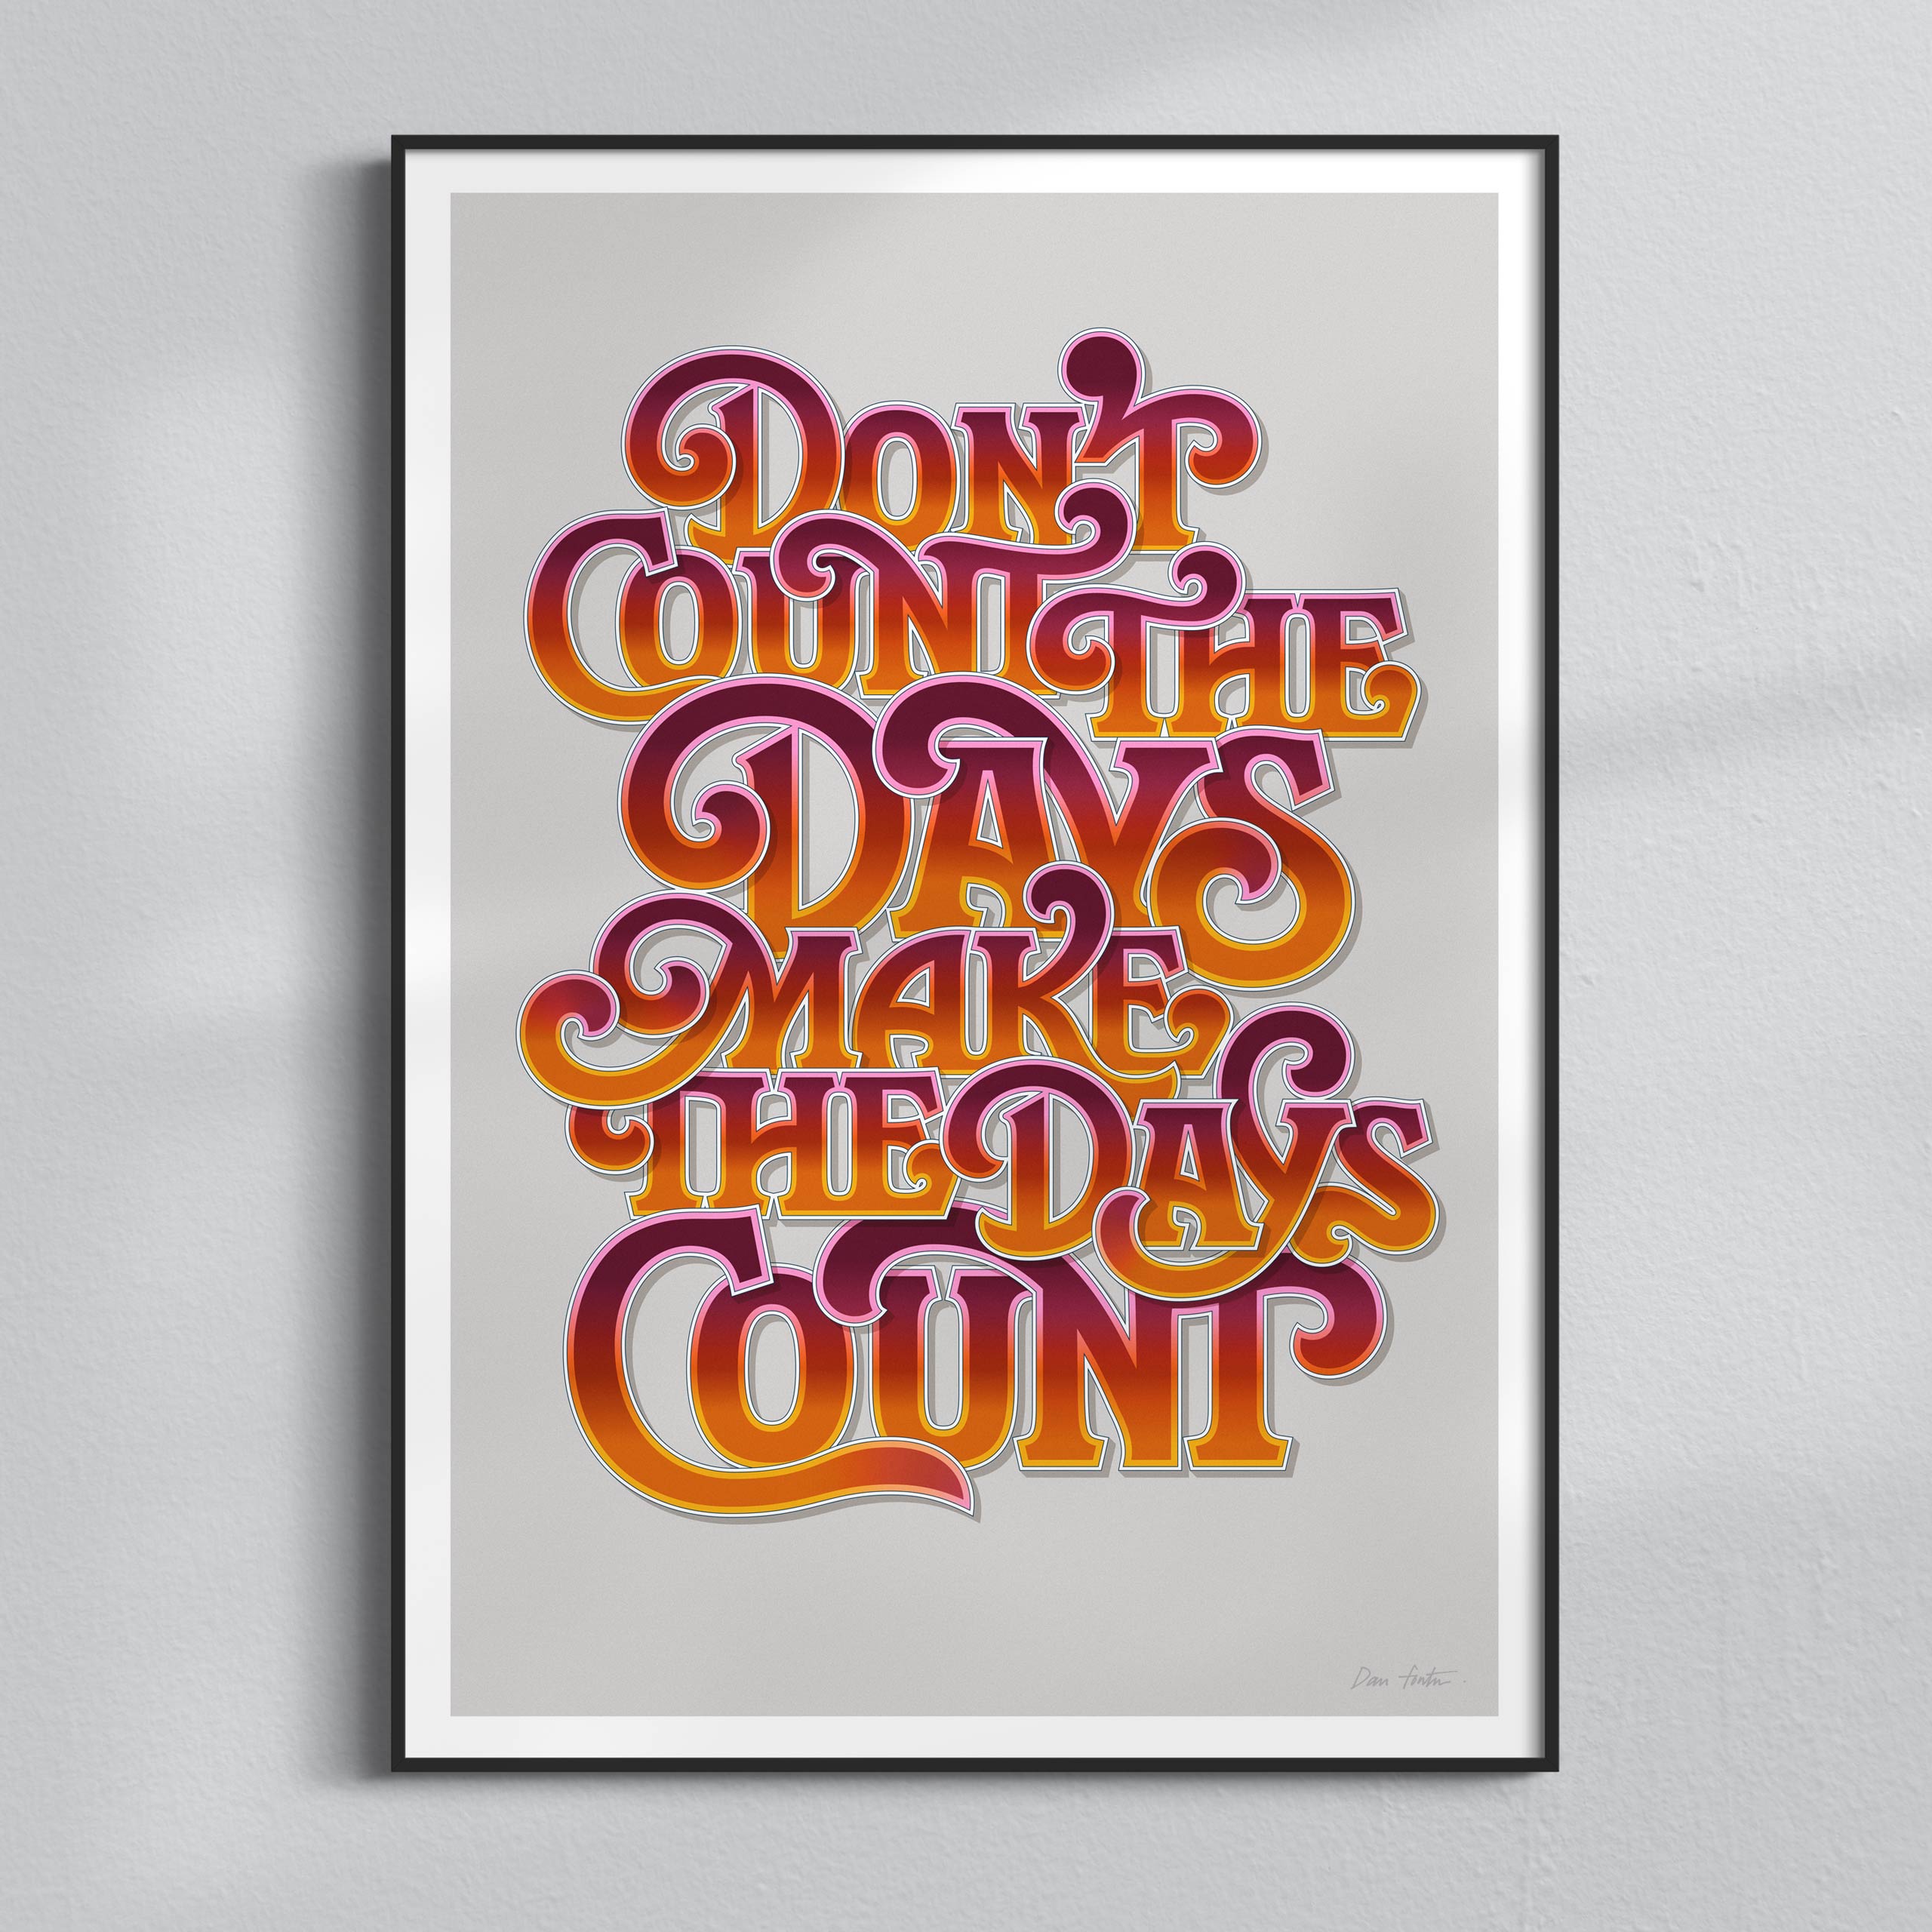 Don't Count the days Poster RED by Dan Forster